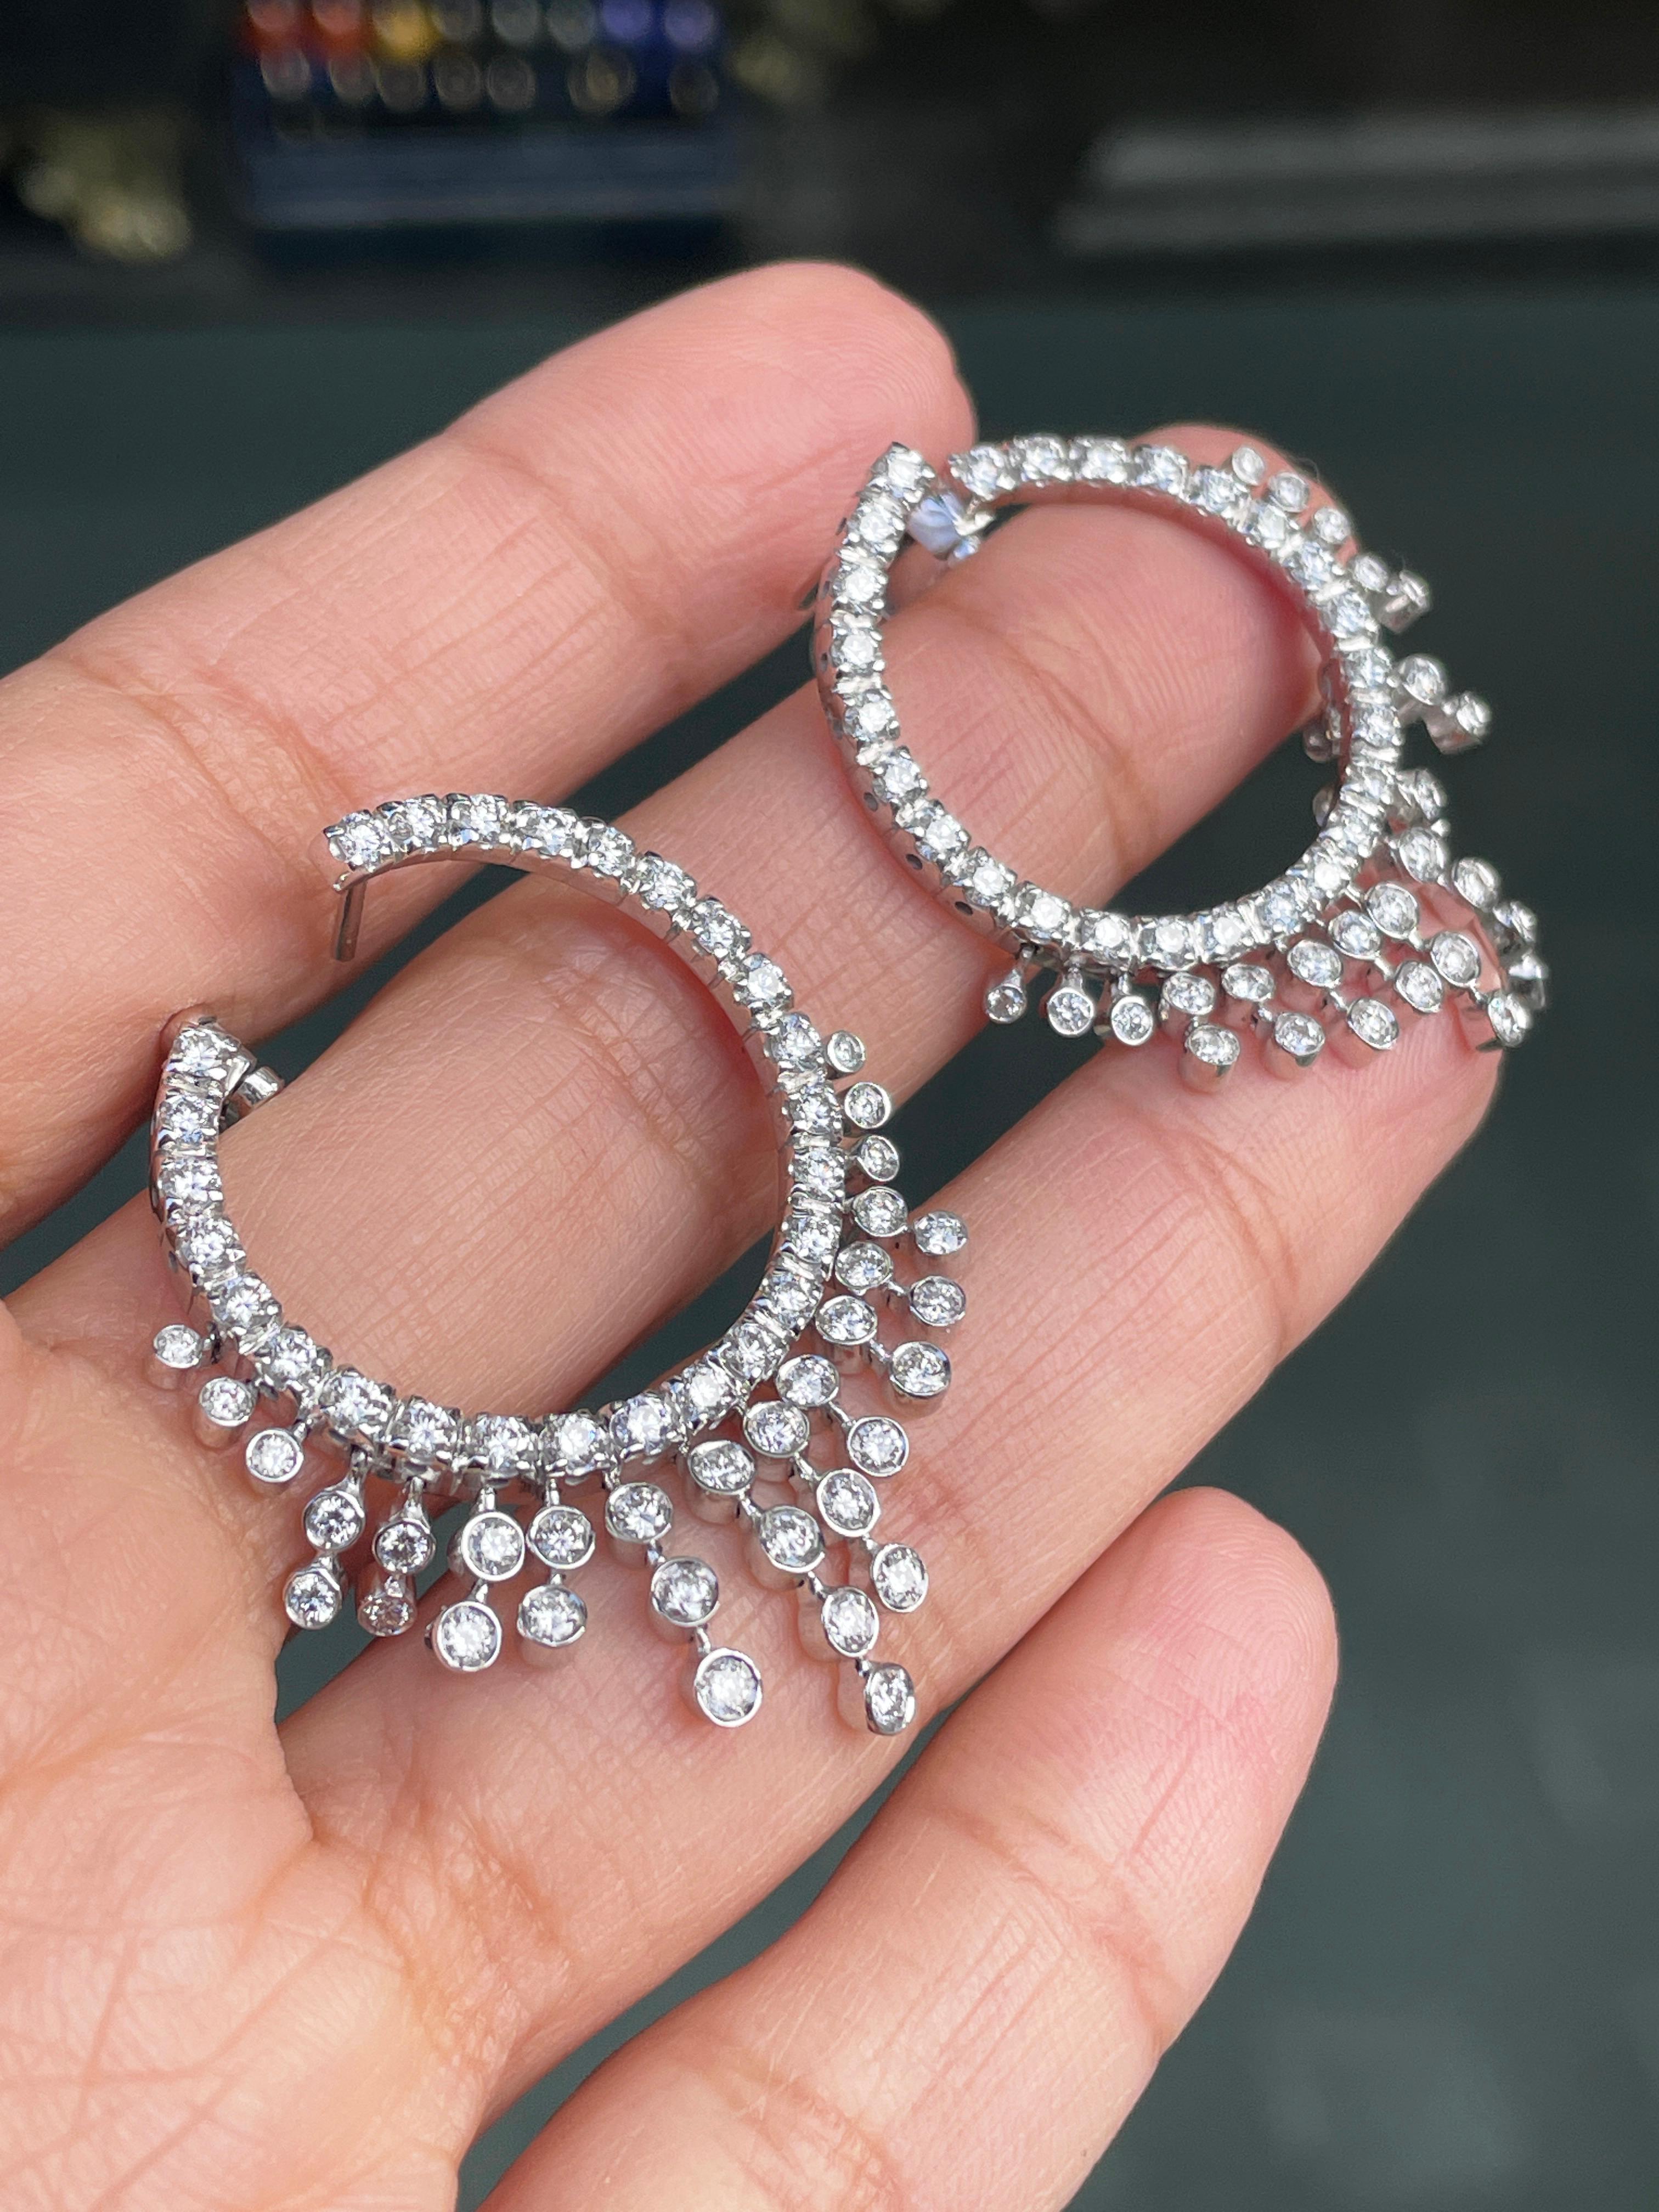 Valente Milano 18ct White Gold and Diamond Chandelier Hoop Earrings In Excellent Condition For Sale In London, GB